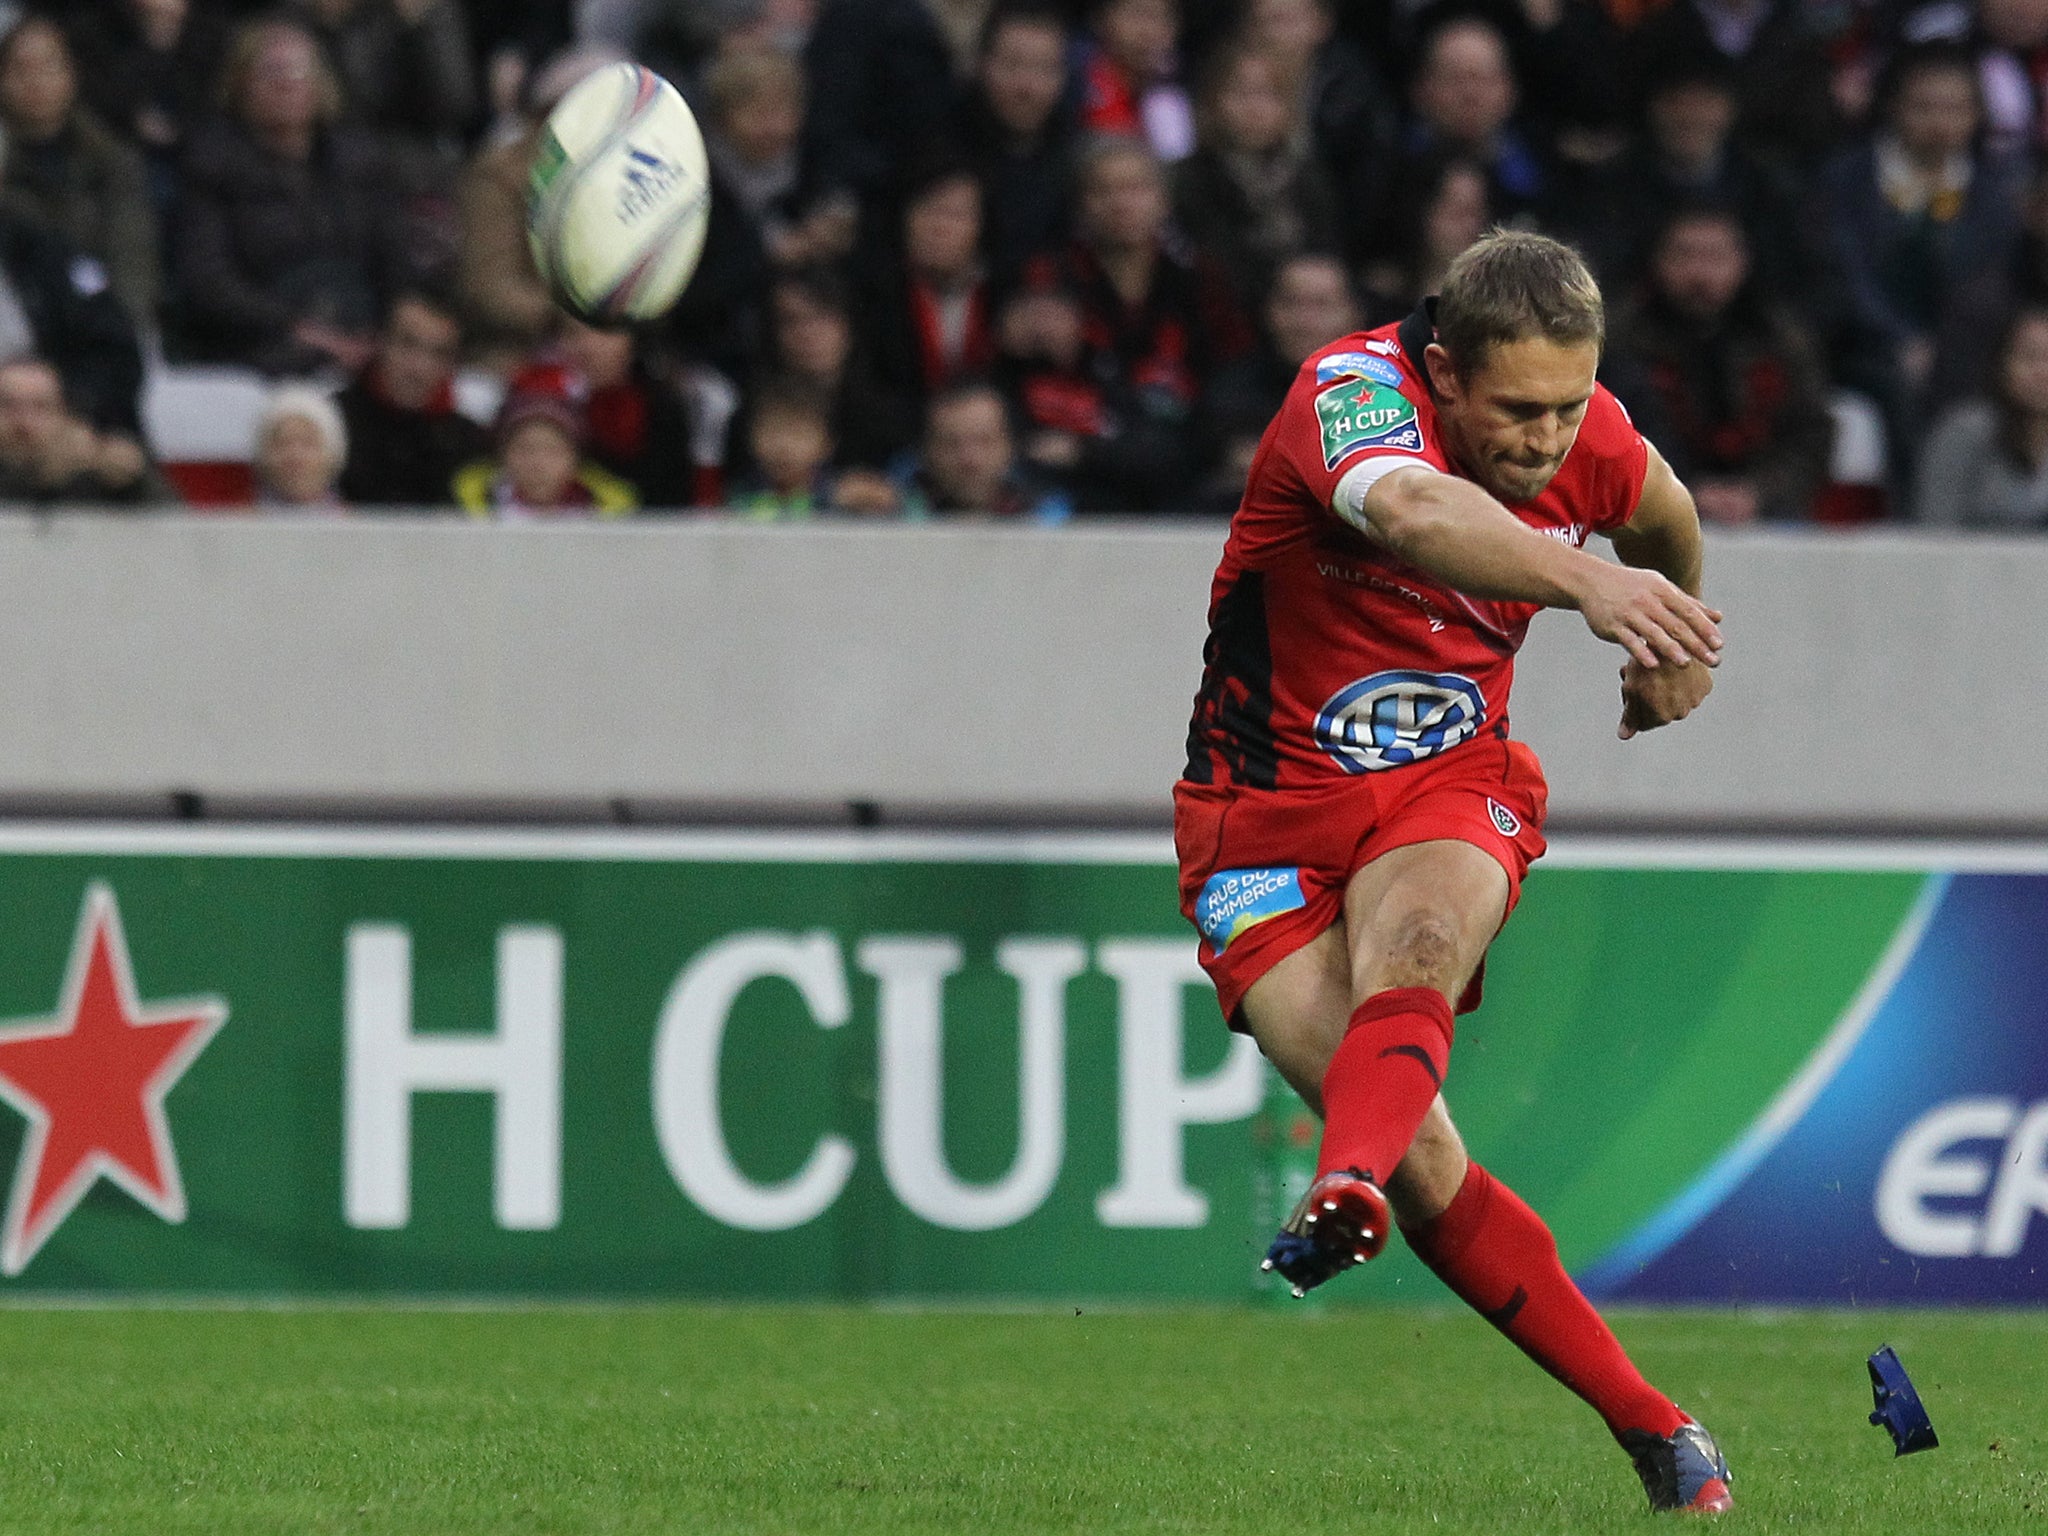 Jonny Wilkinson converts a penalty for Toulon during their victory over Cardiff Blues